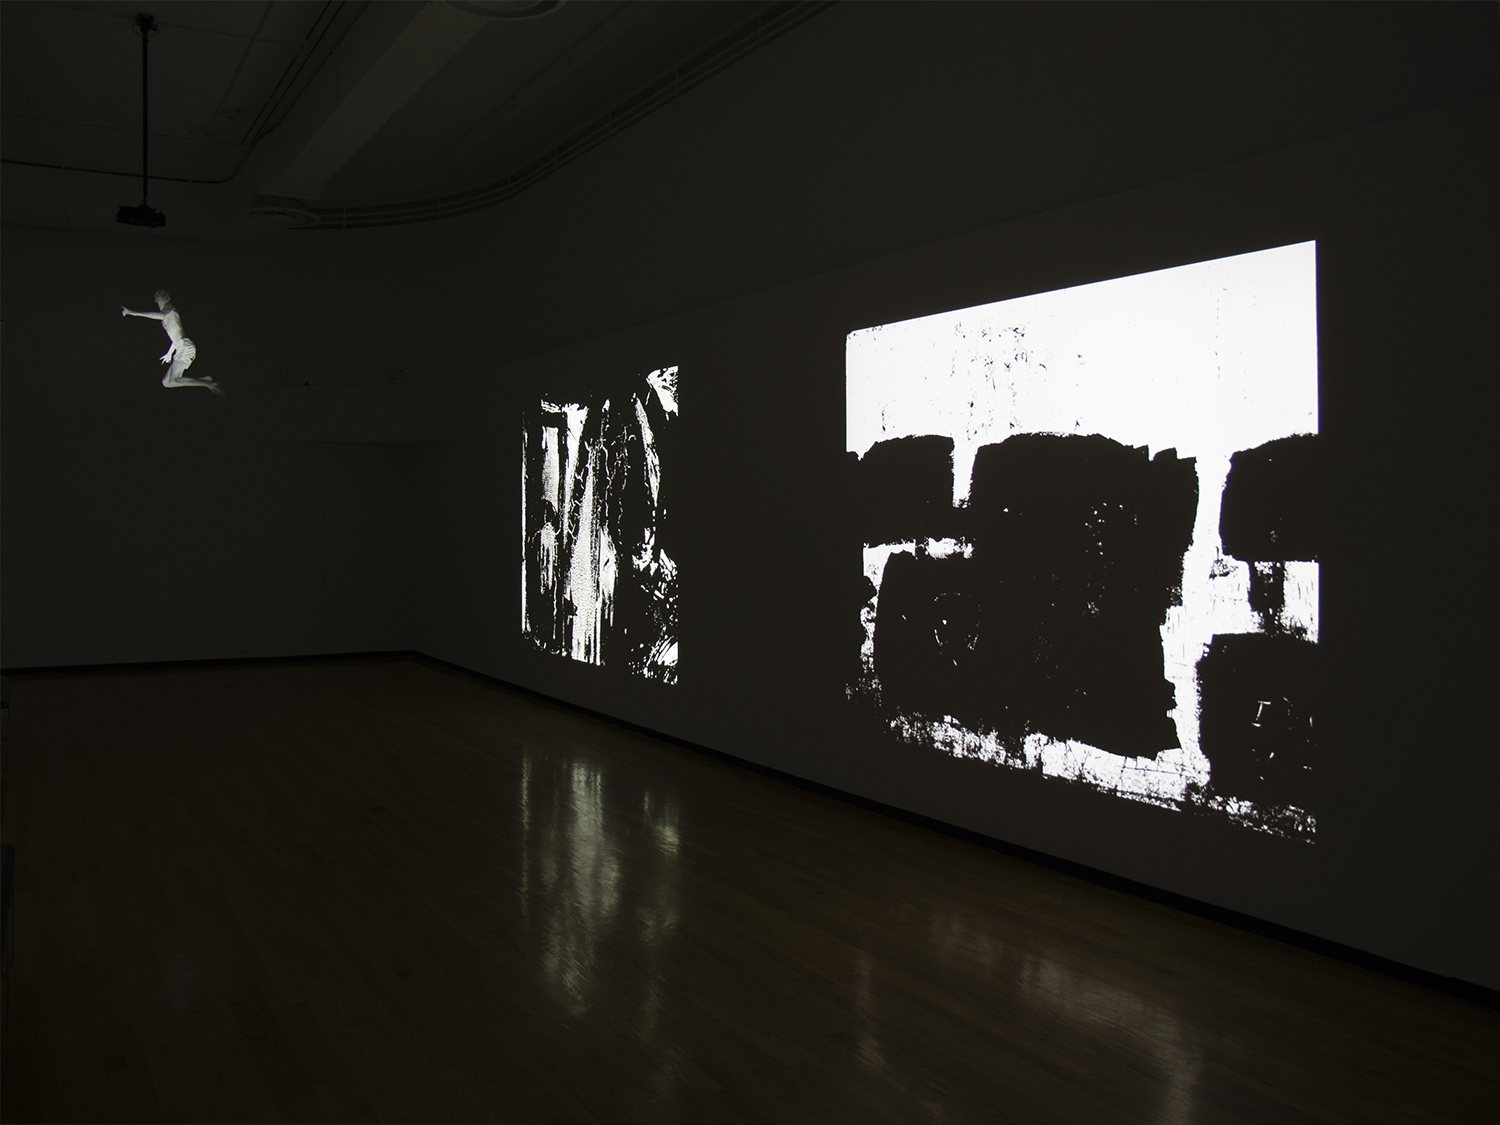 Jan Tichy, "Installation No. 15" (2012). Three-channel HD video installation, Running time: 11 minutes. Image courtesy of the artist and Richard Gray Gallery.